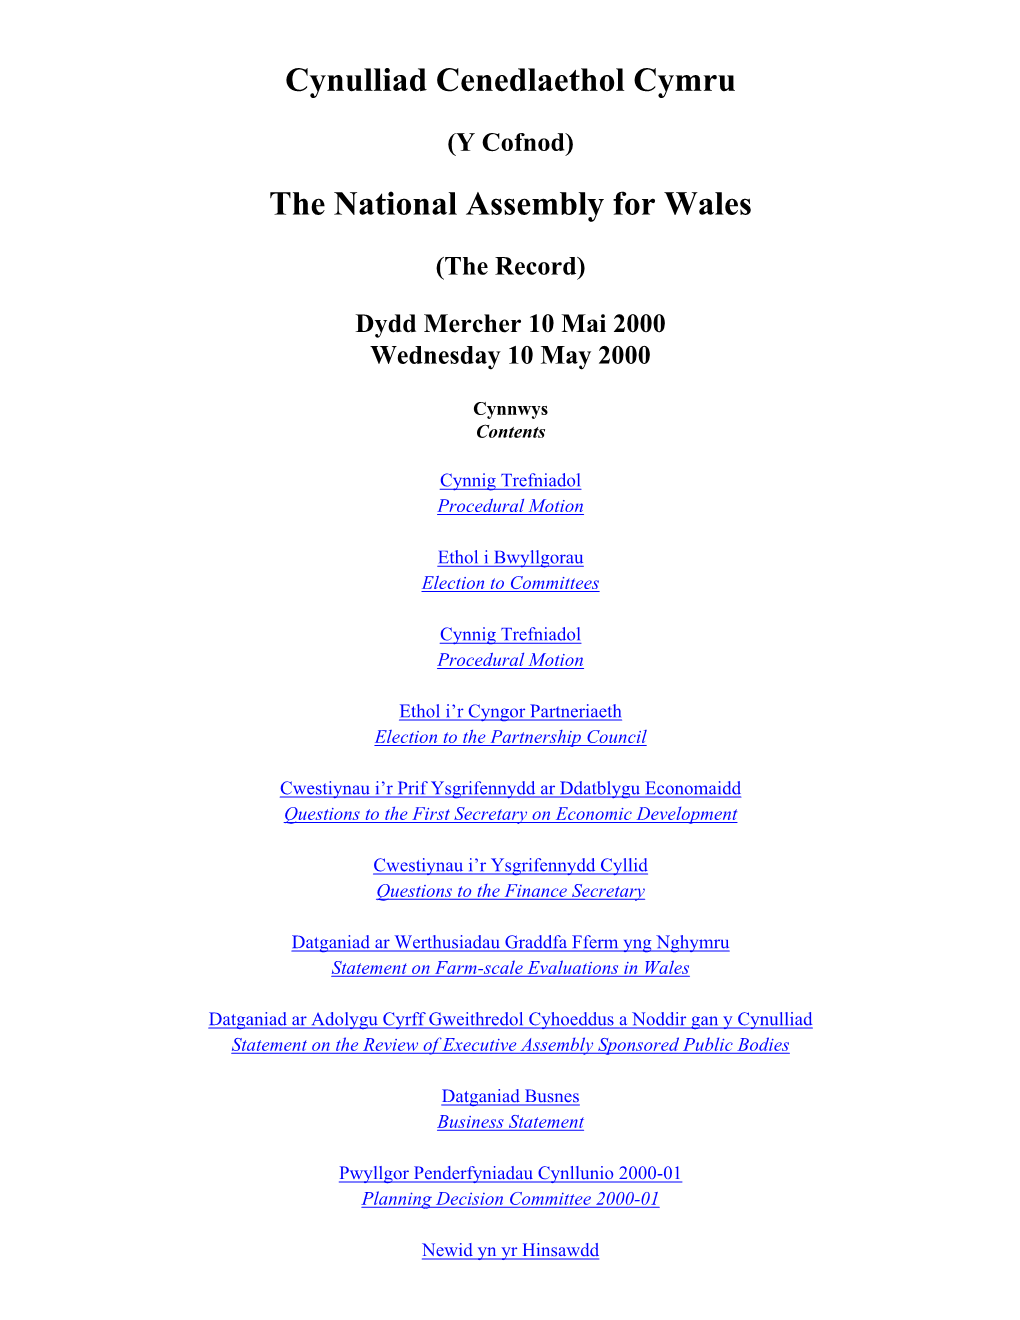 The Official Report of the Welsh Assembly